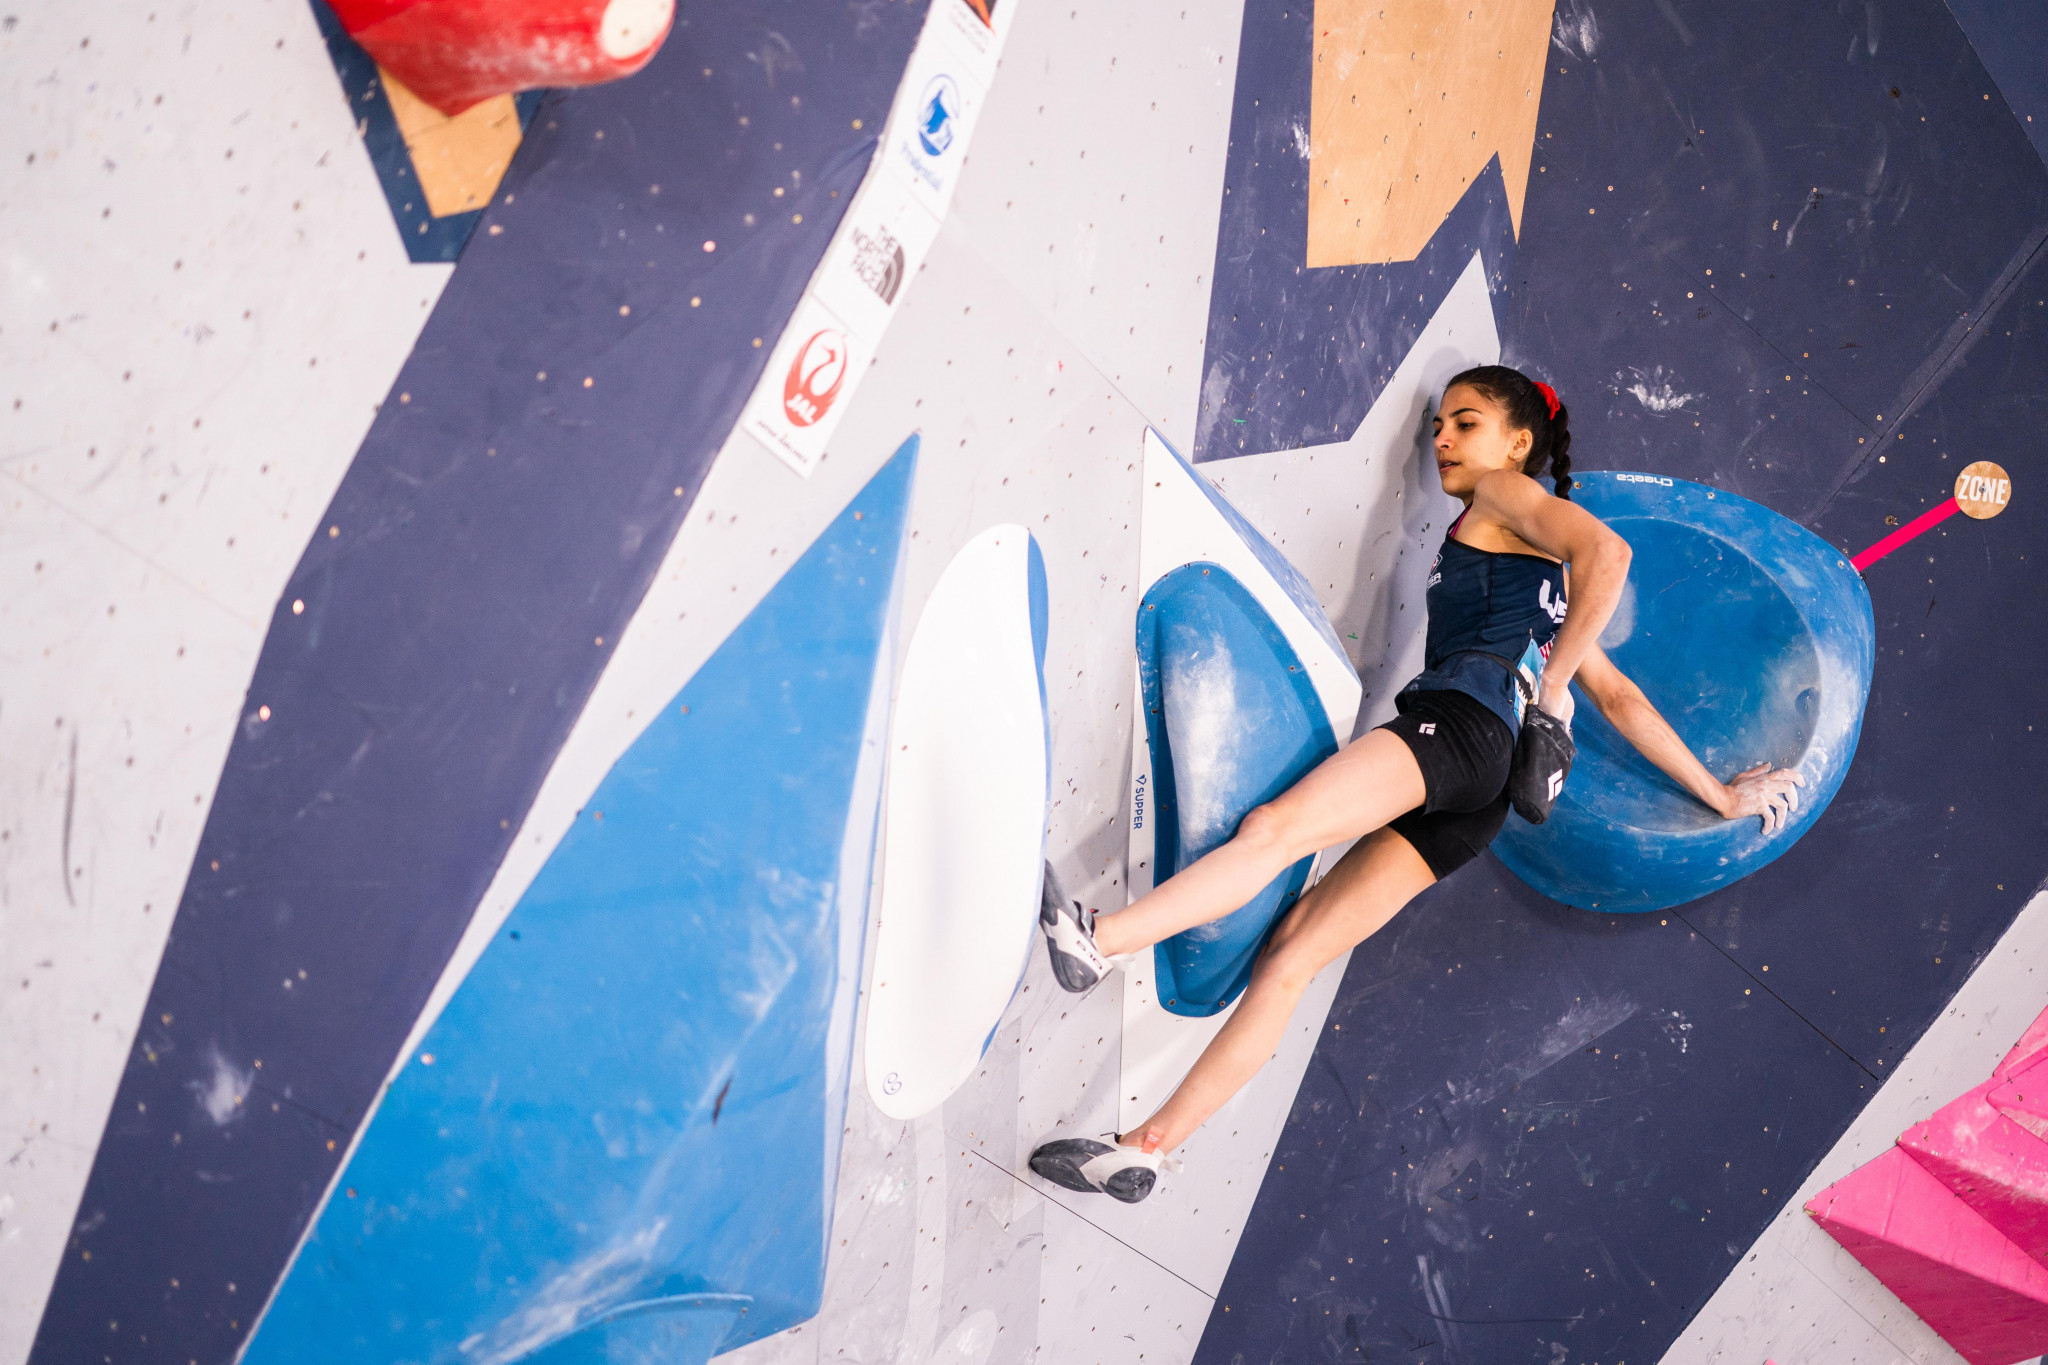 Grossman earns third consecutive IFSC boulder World Cup victory in Salt Lake City